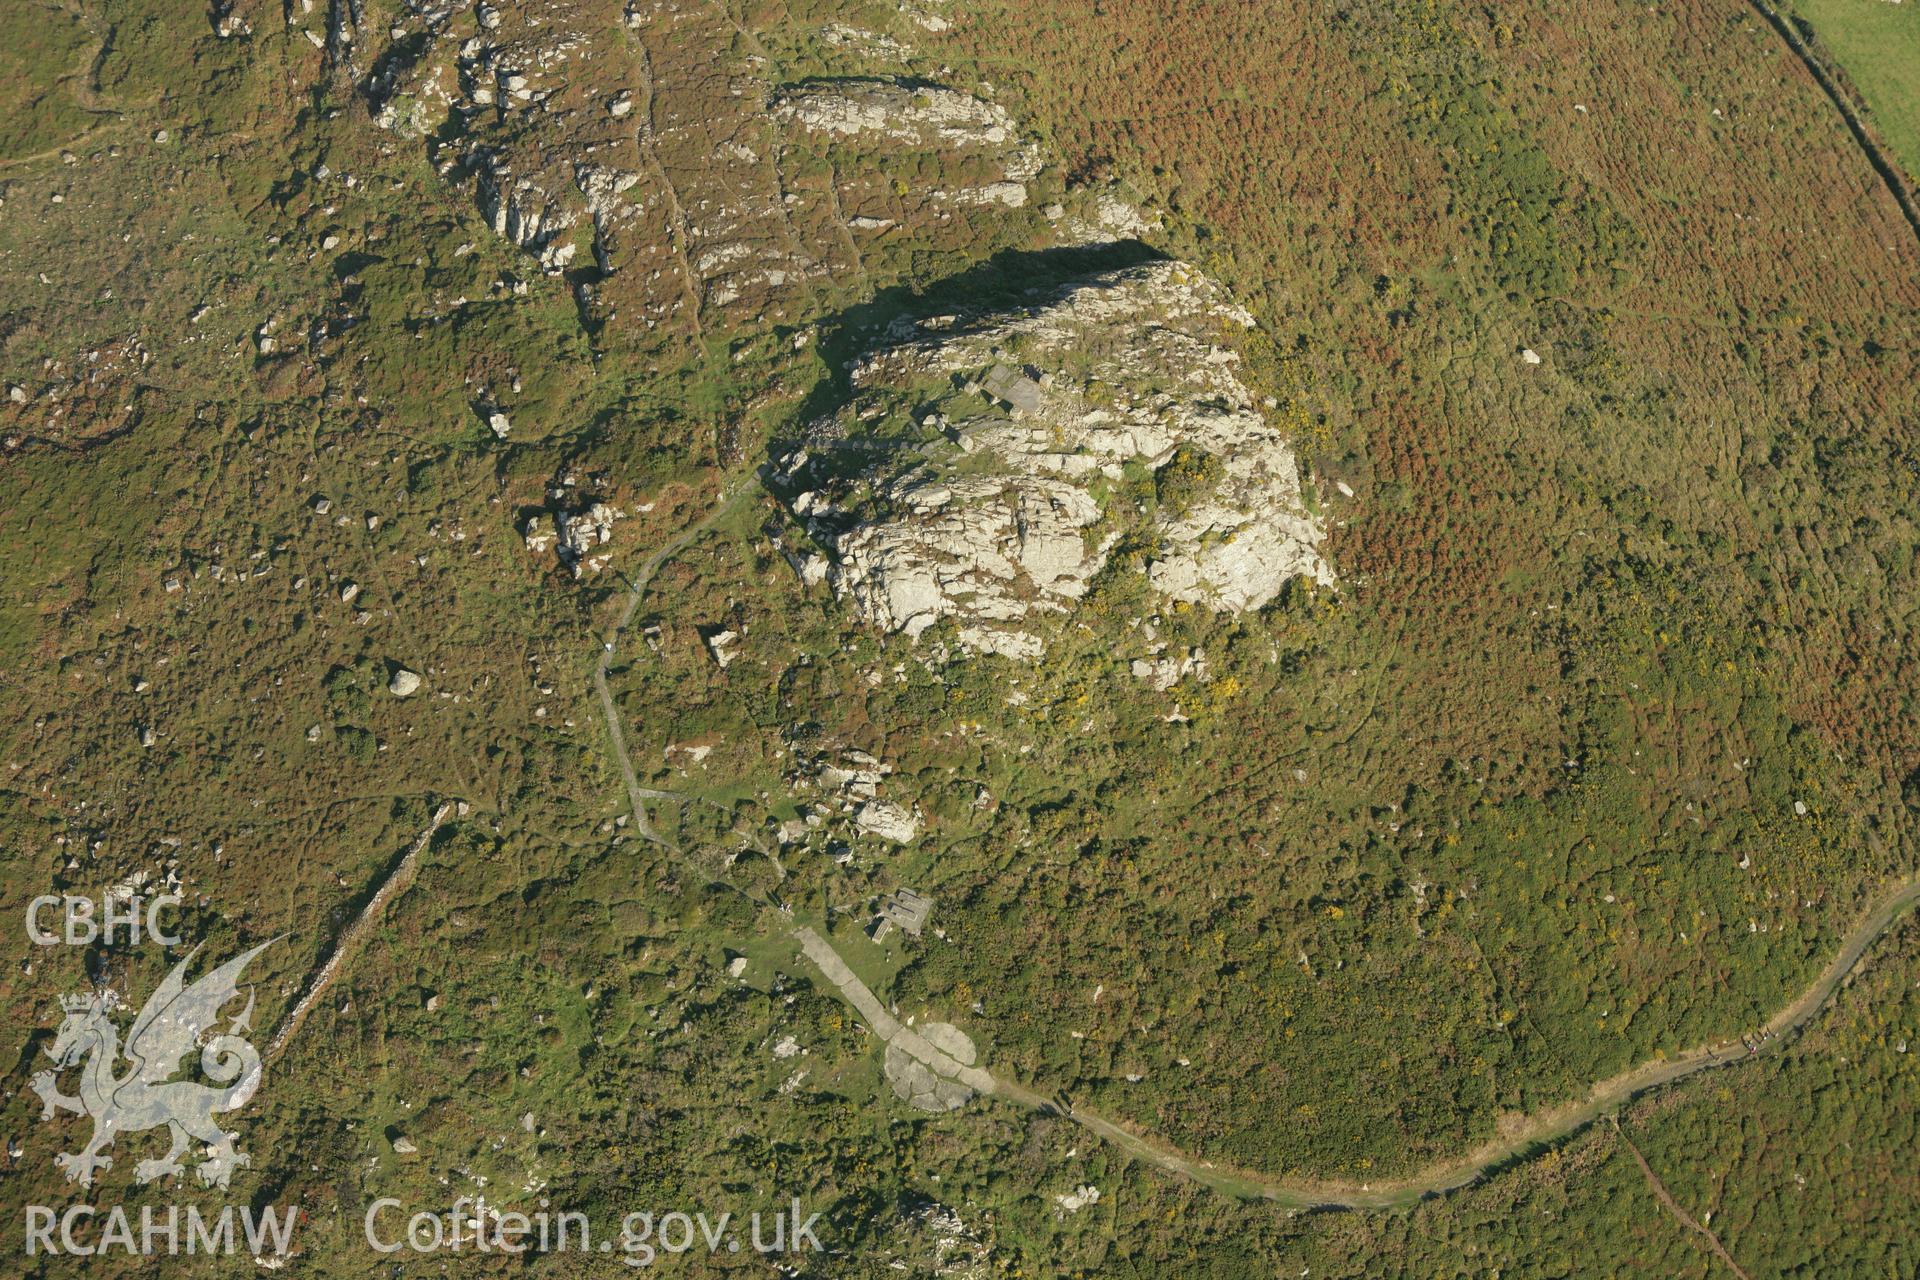 RCAHMW colour oblique photograph of Carn Llidi burial chambers. Taken by Toby Driver on 23/10/2007.